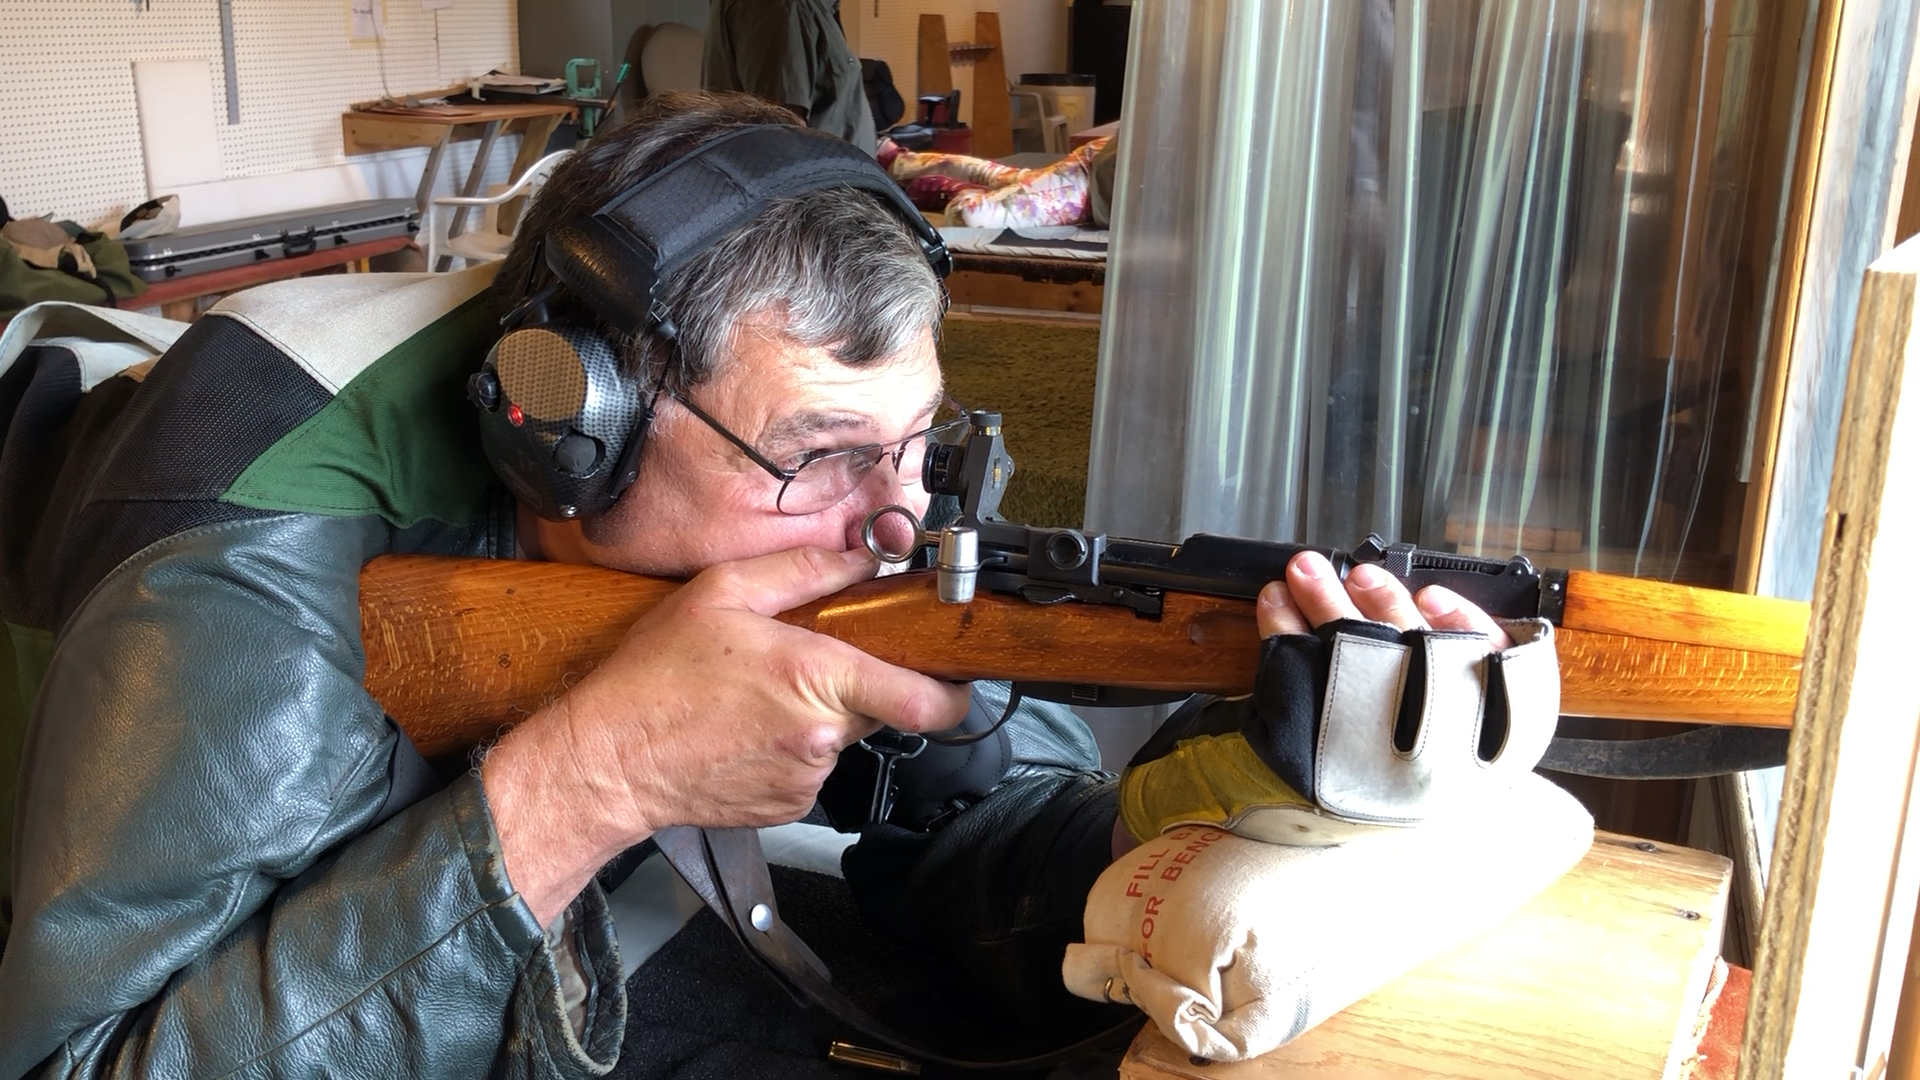 Rifle club member aims for target